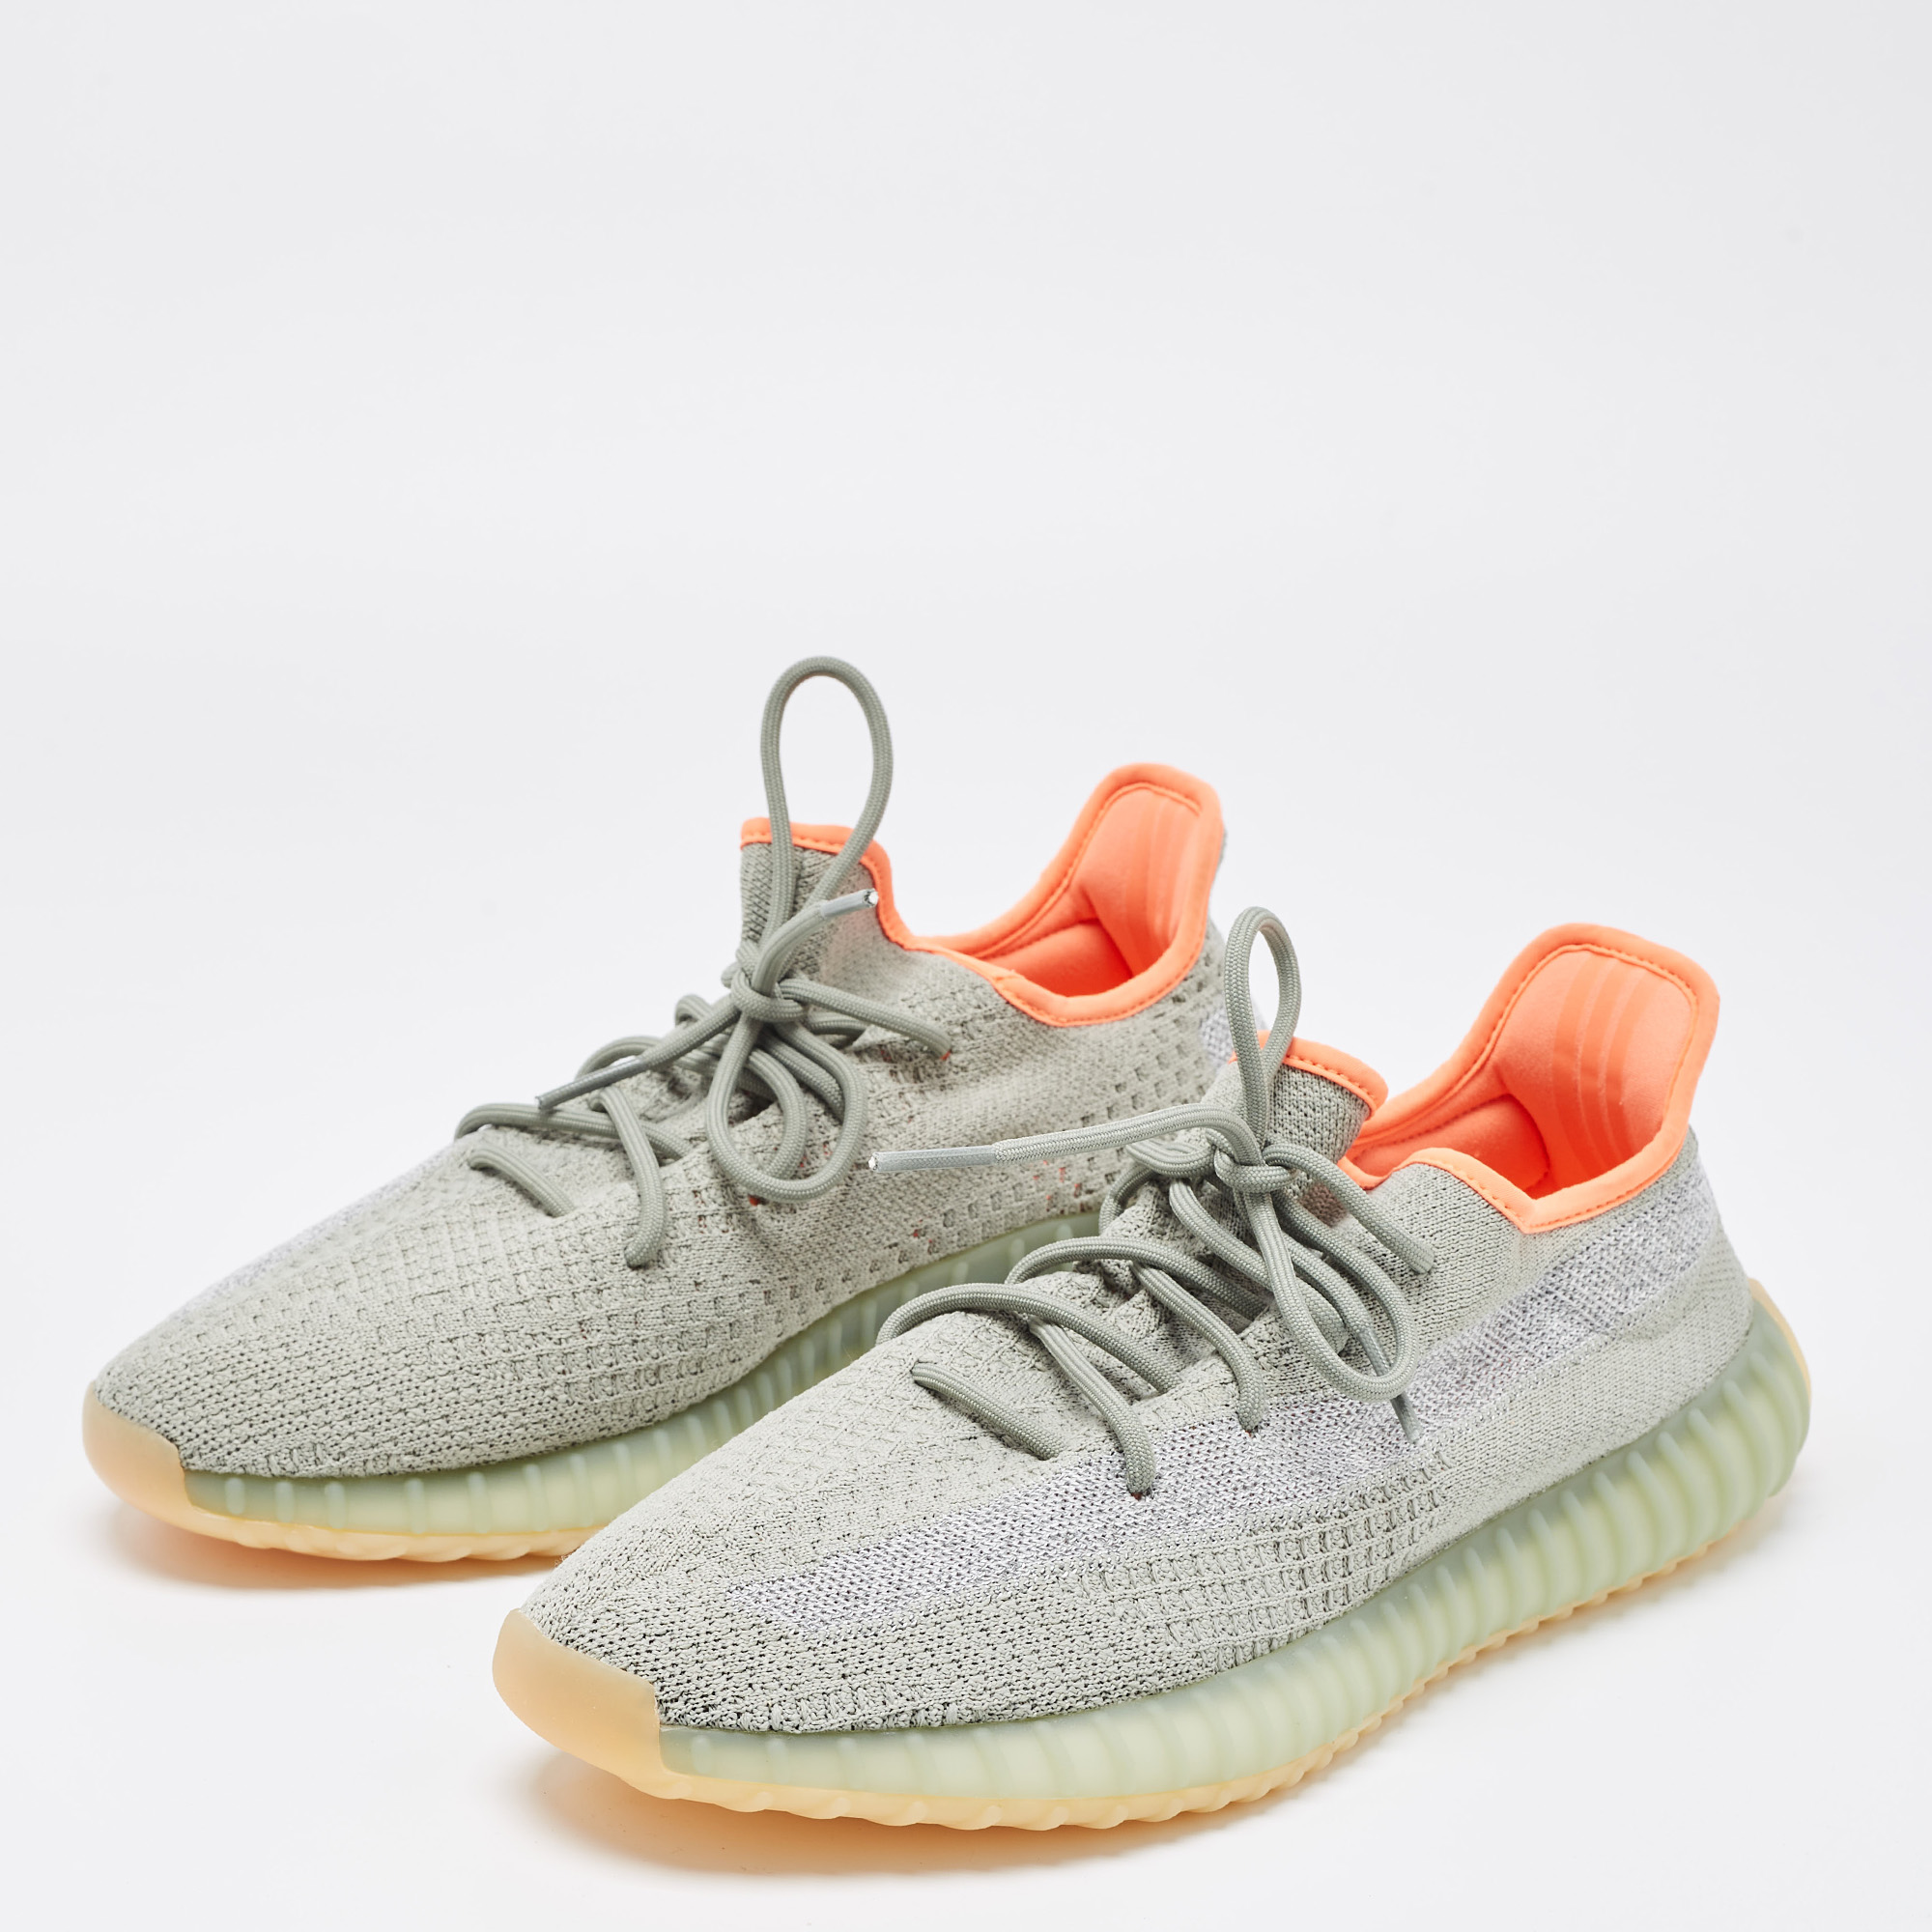 

Yeezy x Adidas Green Knit Fabric Boost 350 V2 Desert Sage Sneakers Size  1/3